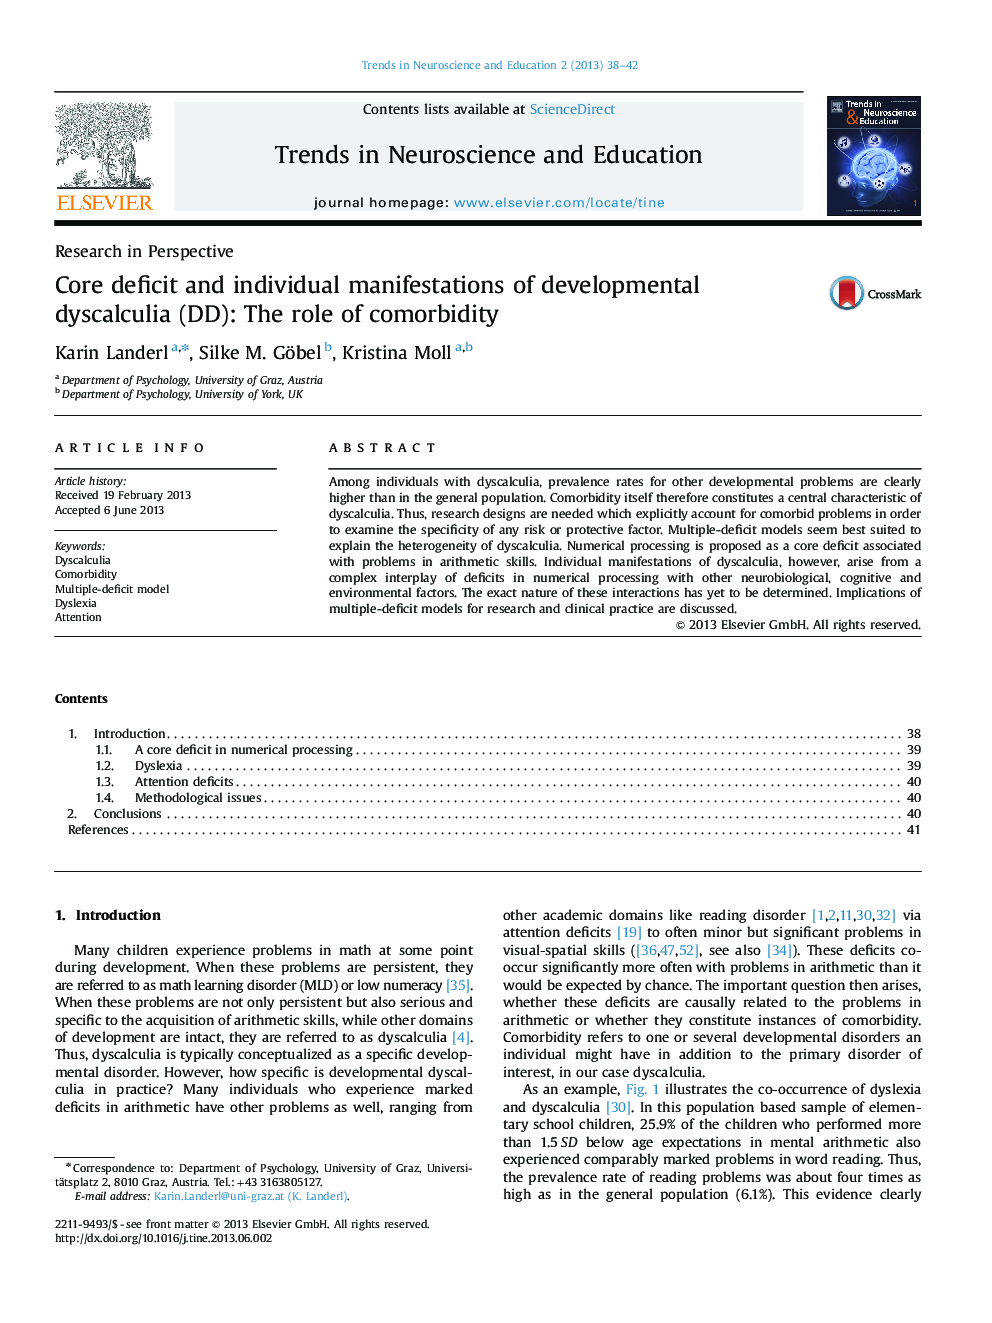 Core deficit and individual manifestations of developmental dyscalculia (DD): The role of comorbidity